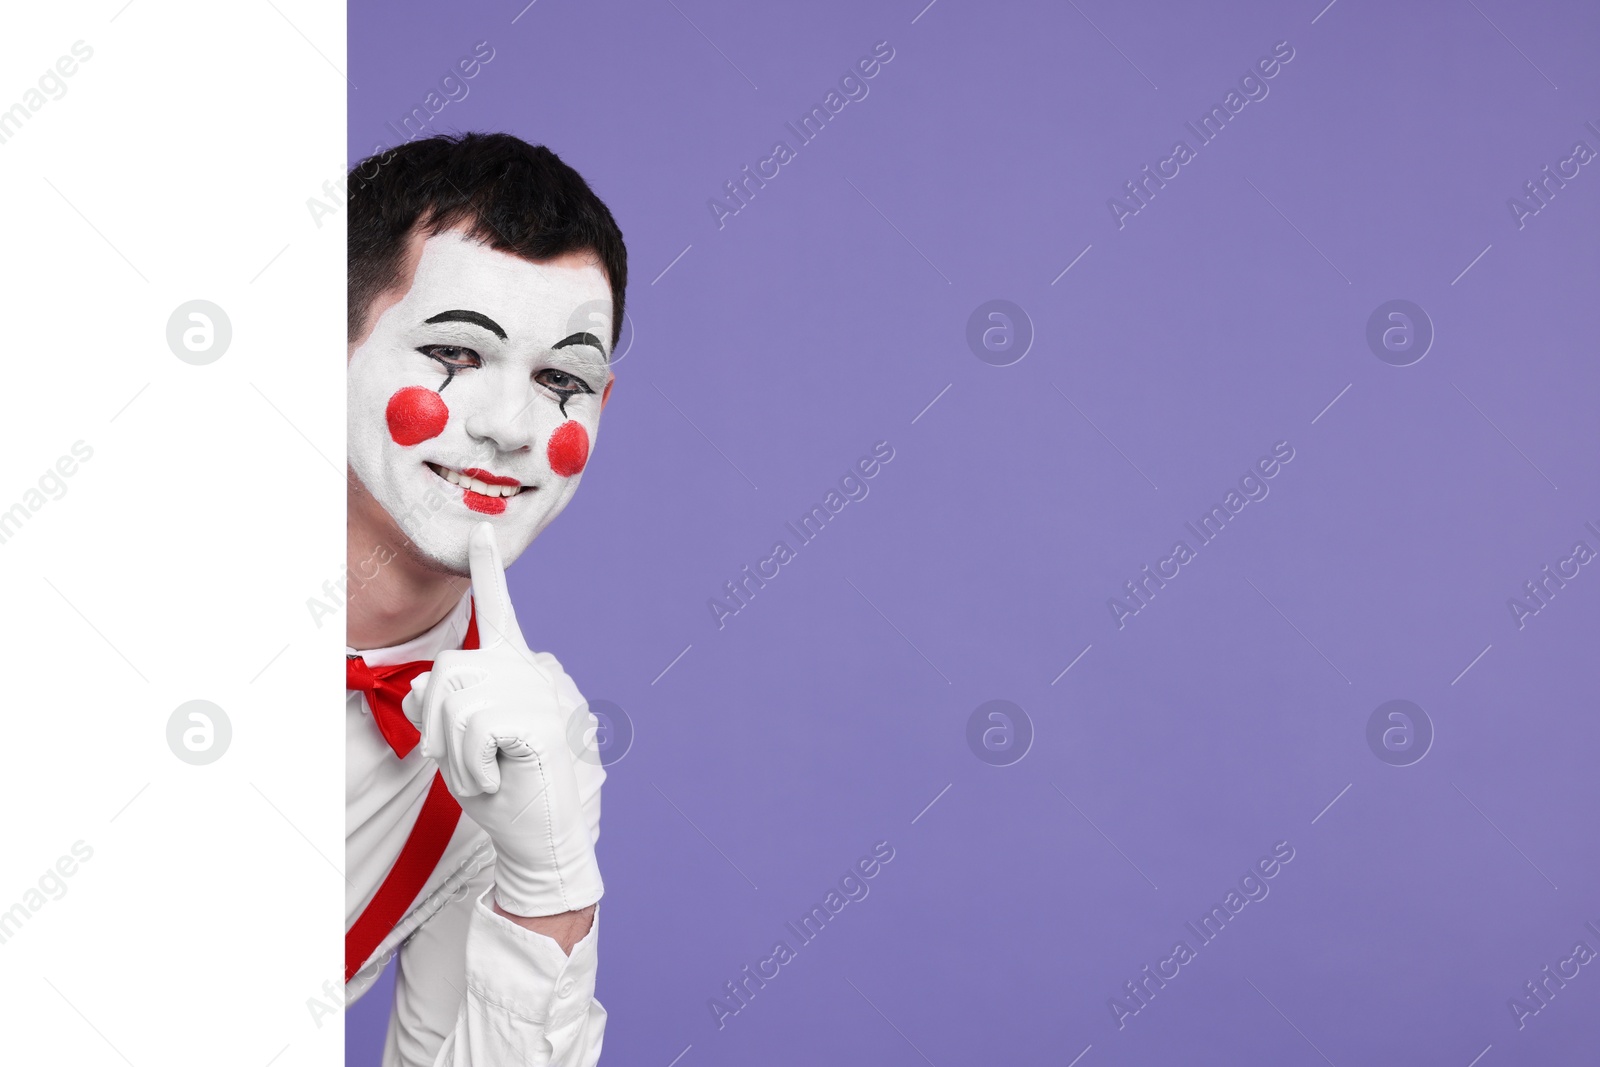 Photo of Funny mime artist peeking out of blank poster on purple background. Space for text